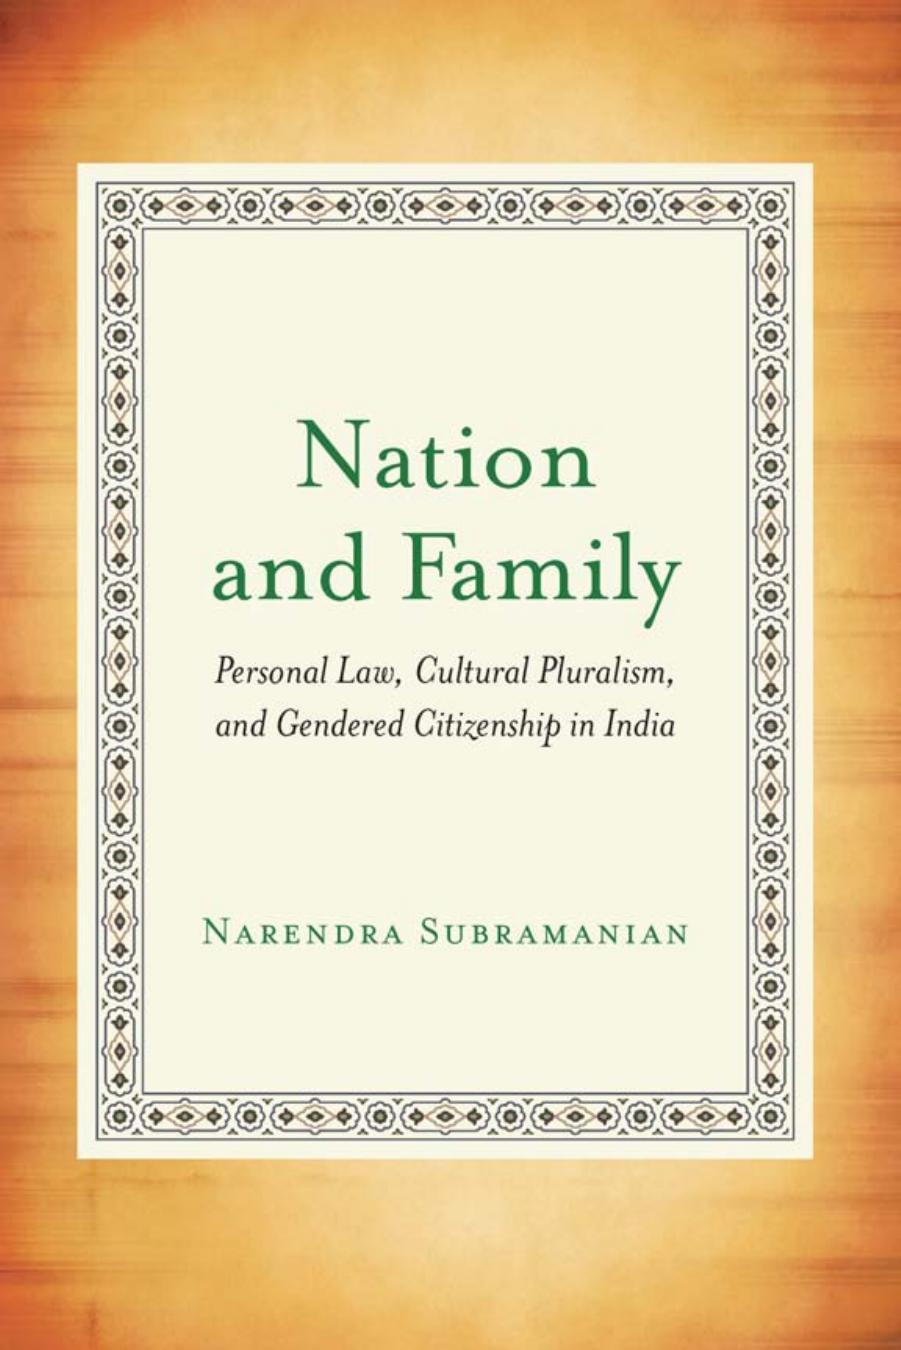 Nation and Family Personal Law, Cultural Pluralism, and Gendered Citizenship in India 2014